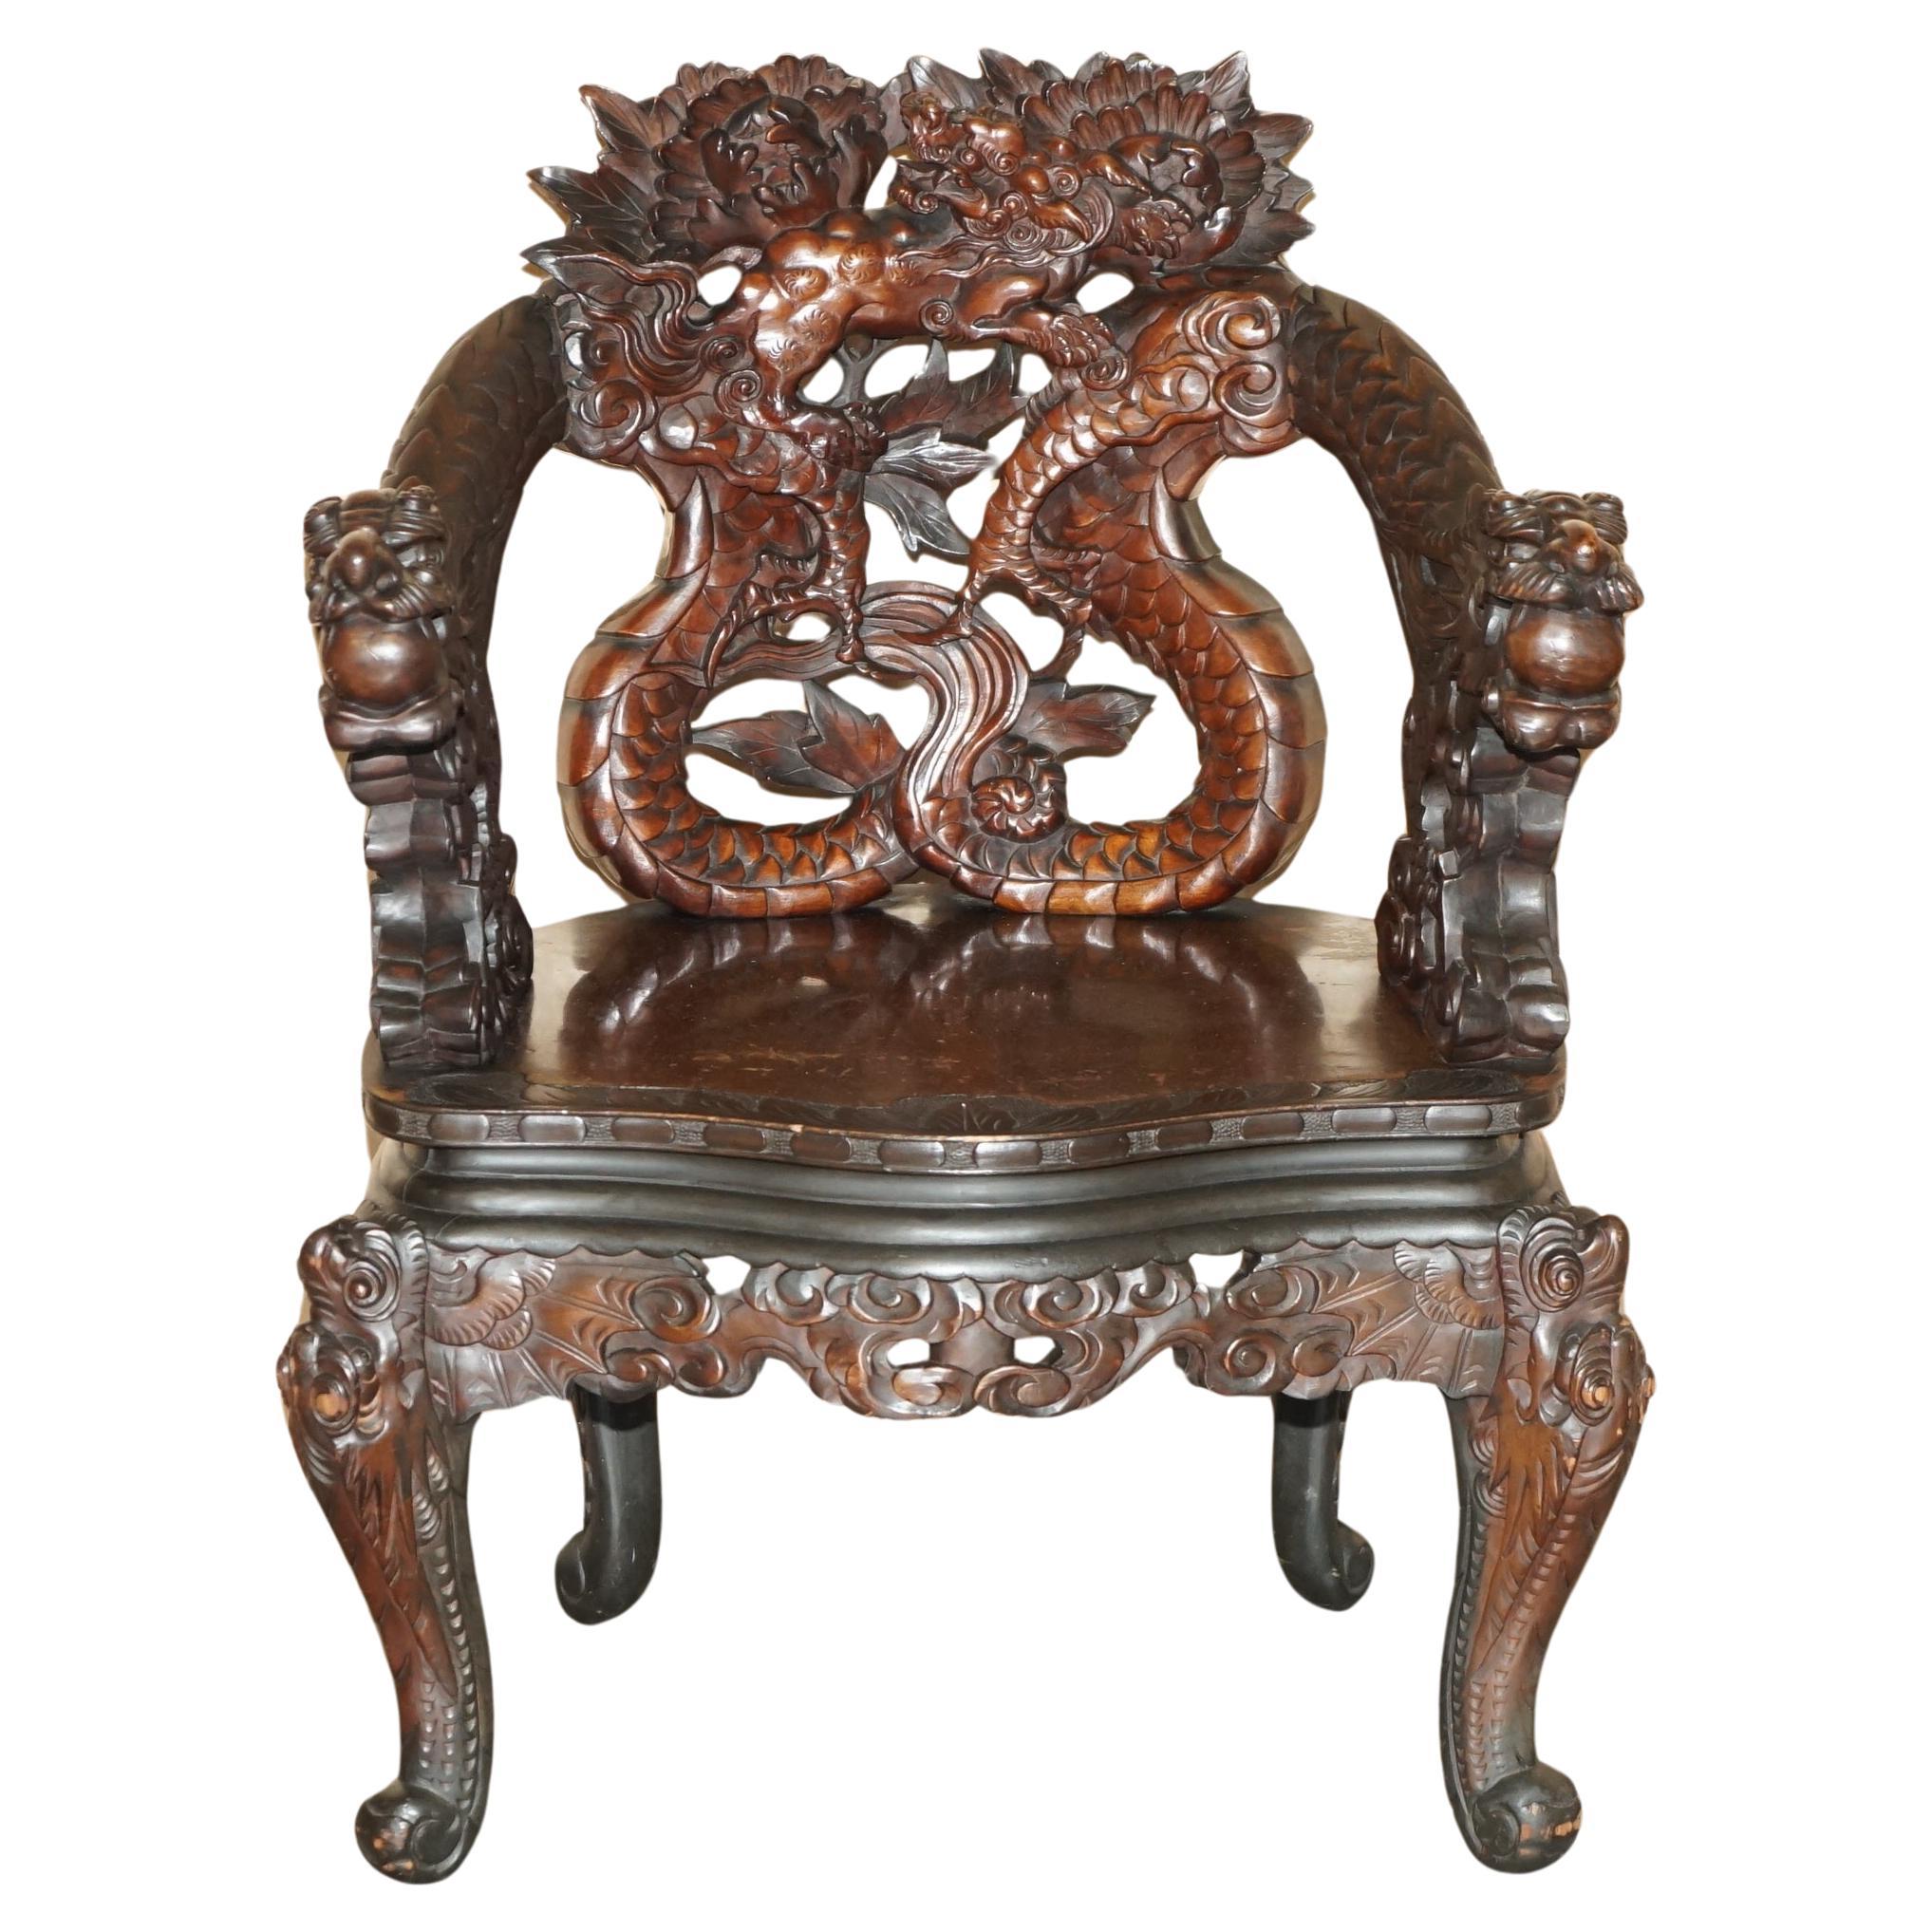 EXQUISITE CIRCA 1880 QING DYNASTY CARVED HARDWOOD CHINESE DRAGON ARMCHAiR For Sale